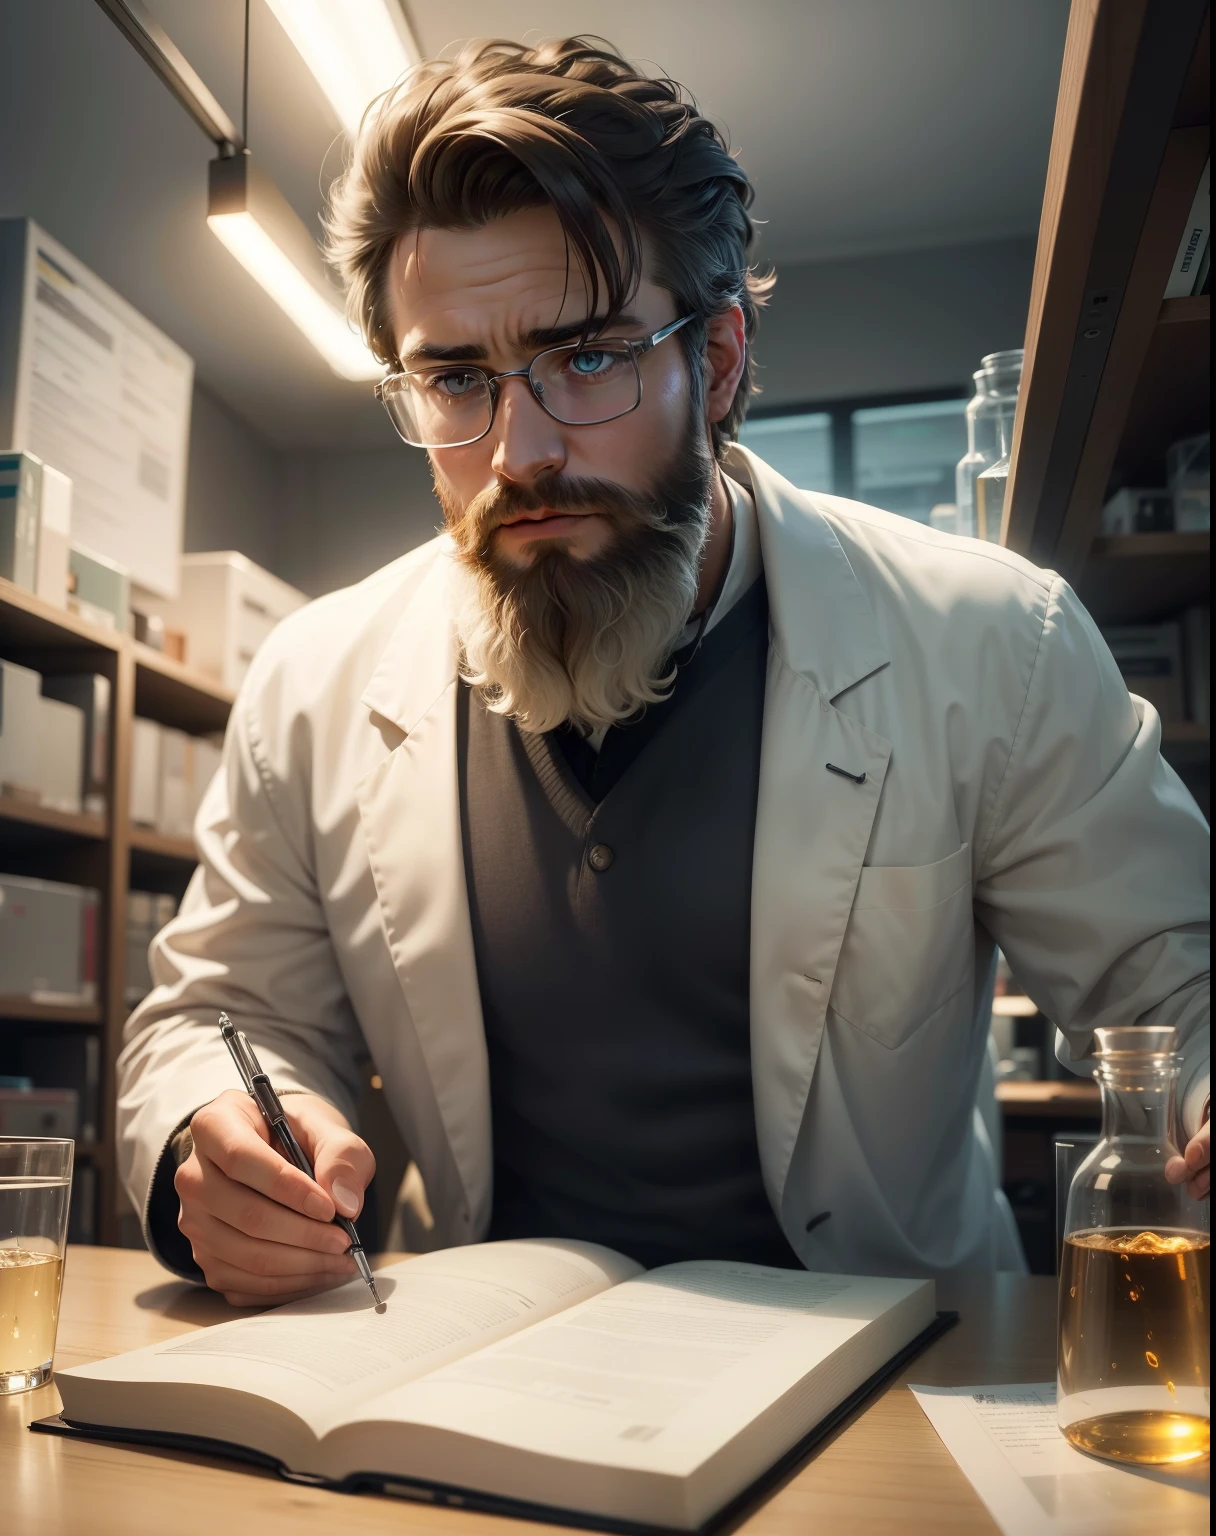 In the best quality image, a young scientist with a beard is captivated by the mysteries of the universe, working in a state-of-the-art laboratory. The scene is rendered in 4k, 8k, or high-resolution with a masterpiece level of detail (1.2). The Scientist's focused expression and pensive look are highlighted under the warm, realistic, or photorealistic (1.37) light of a lamp. Deep of field.

The background reveals a modern and well-equipped setup filled with lab equipment, experiments, and a multitude of scientific papers and journals neatly stacked on shelves. The scientist is wearing a white coat